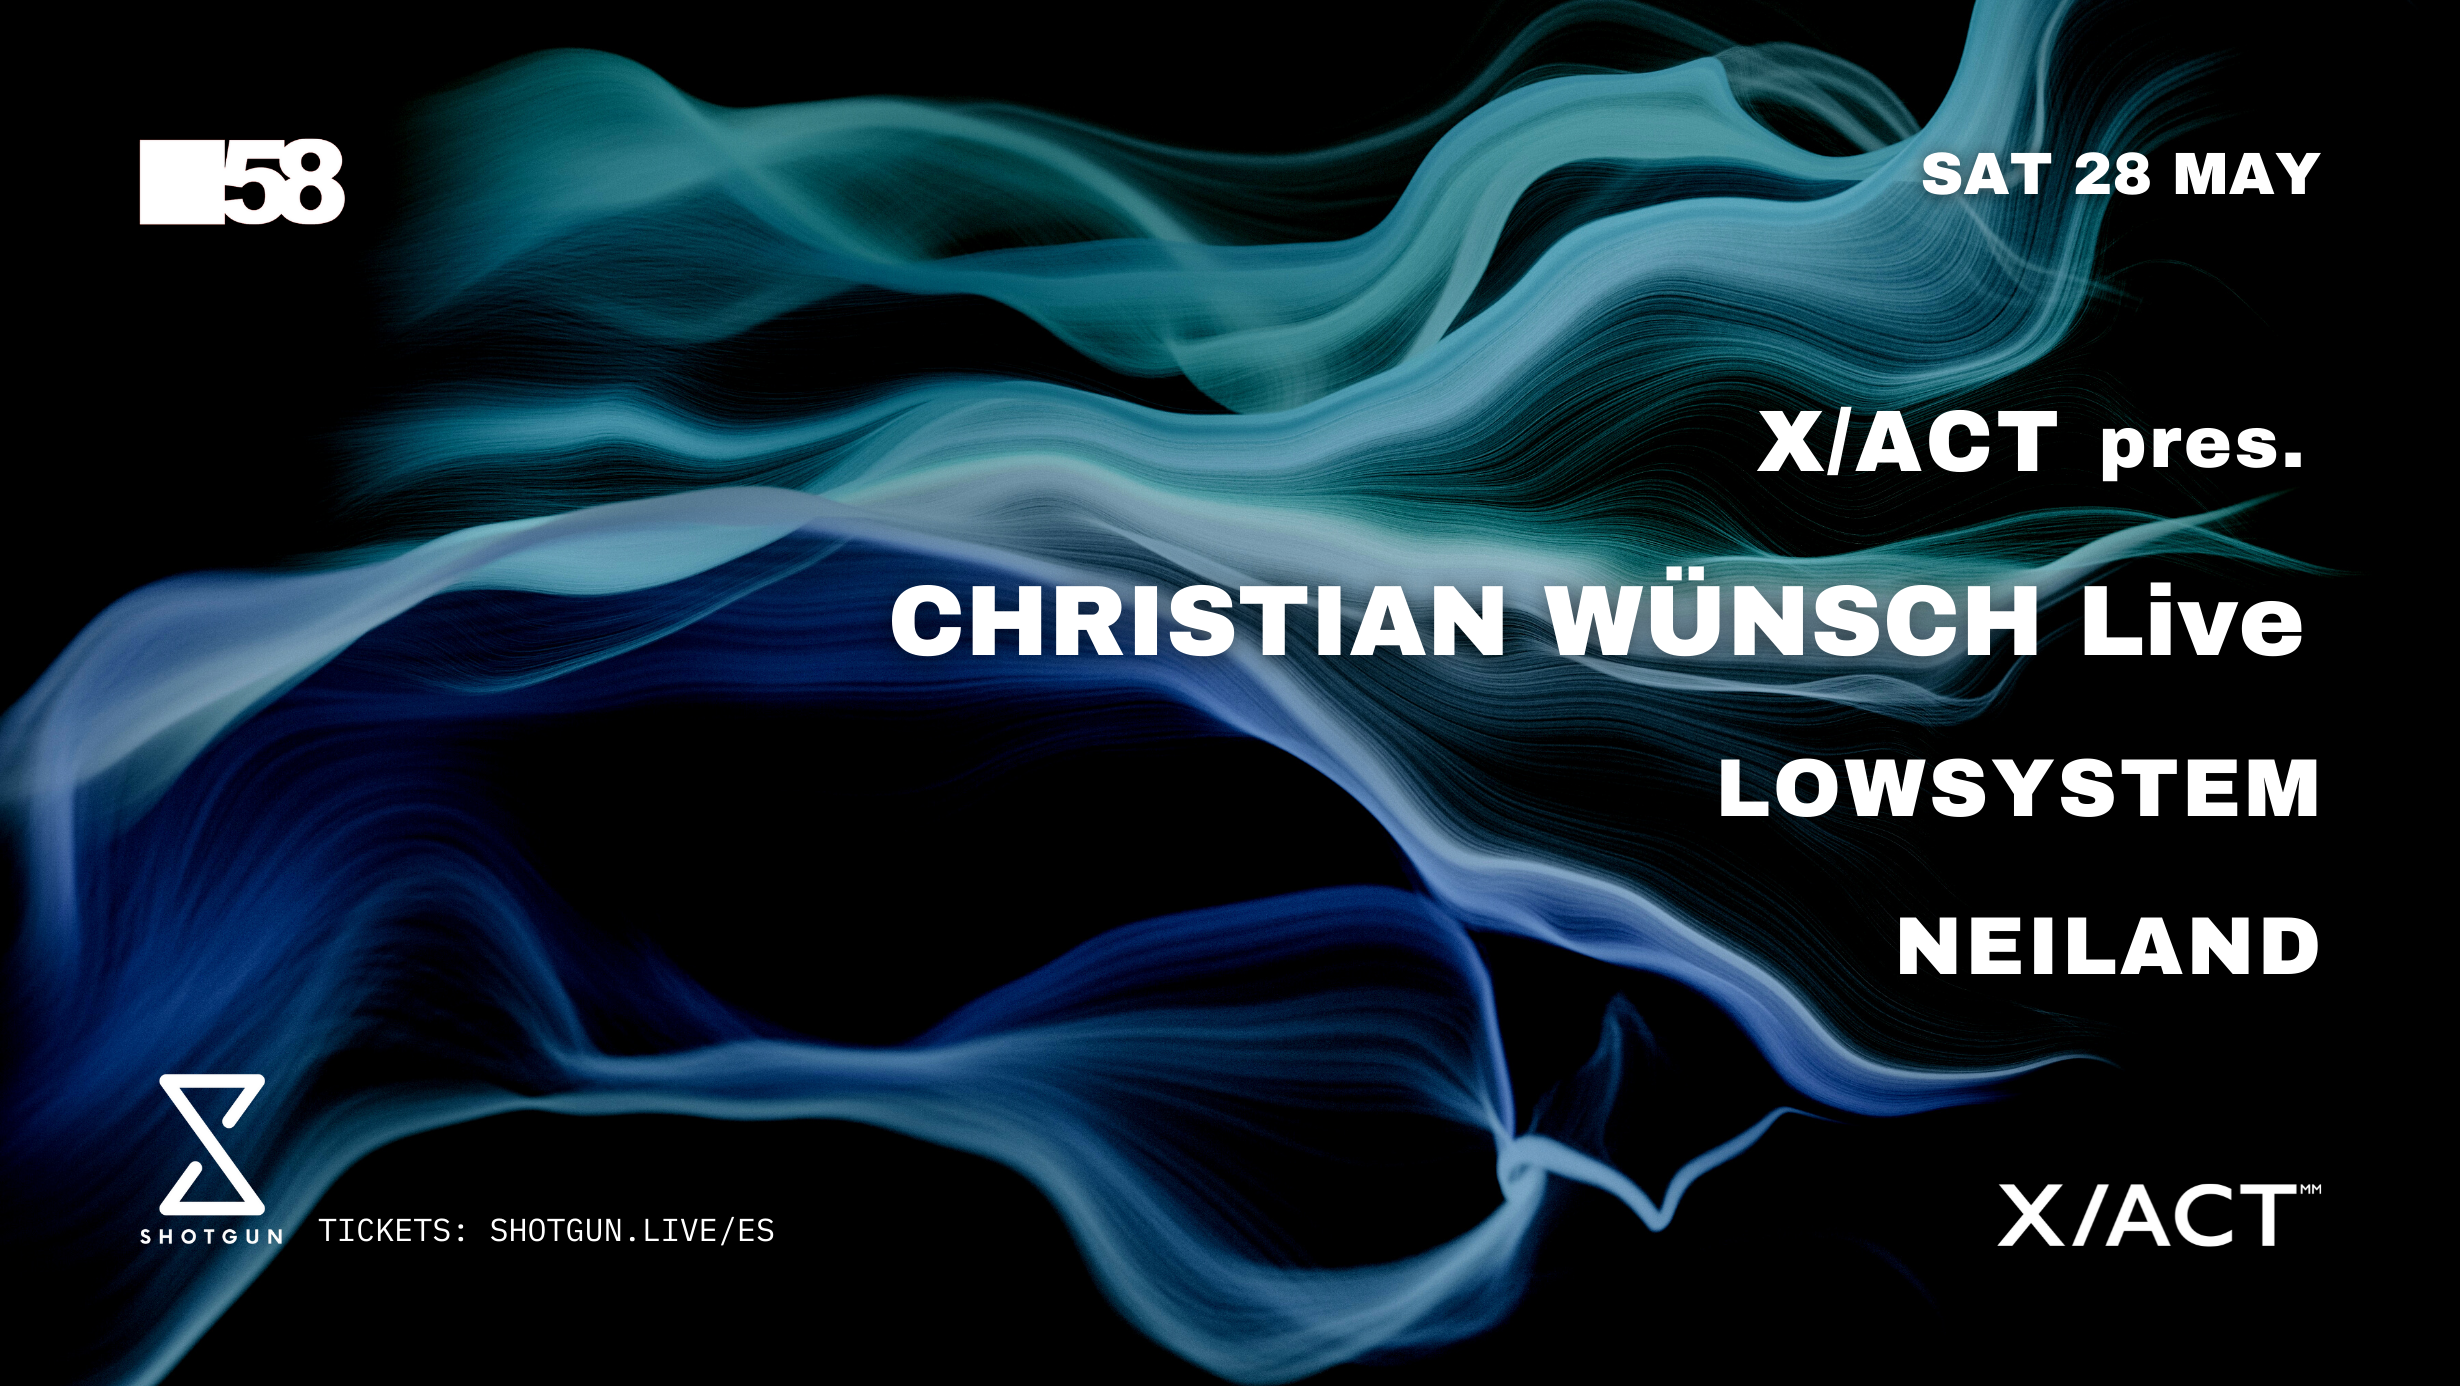 X/ACT pres. Christian Wunsch (live) / Lowsystem / Neiland - Página frontal